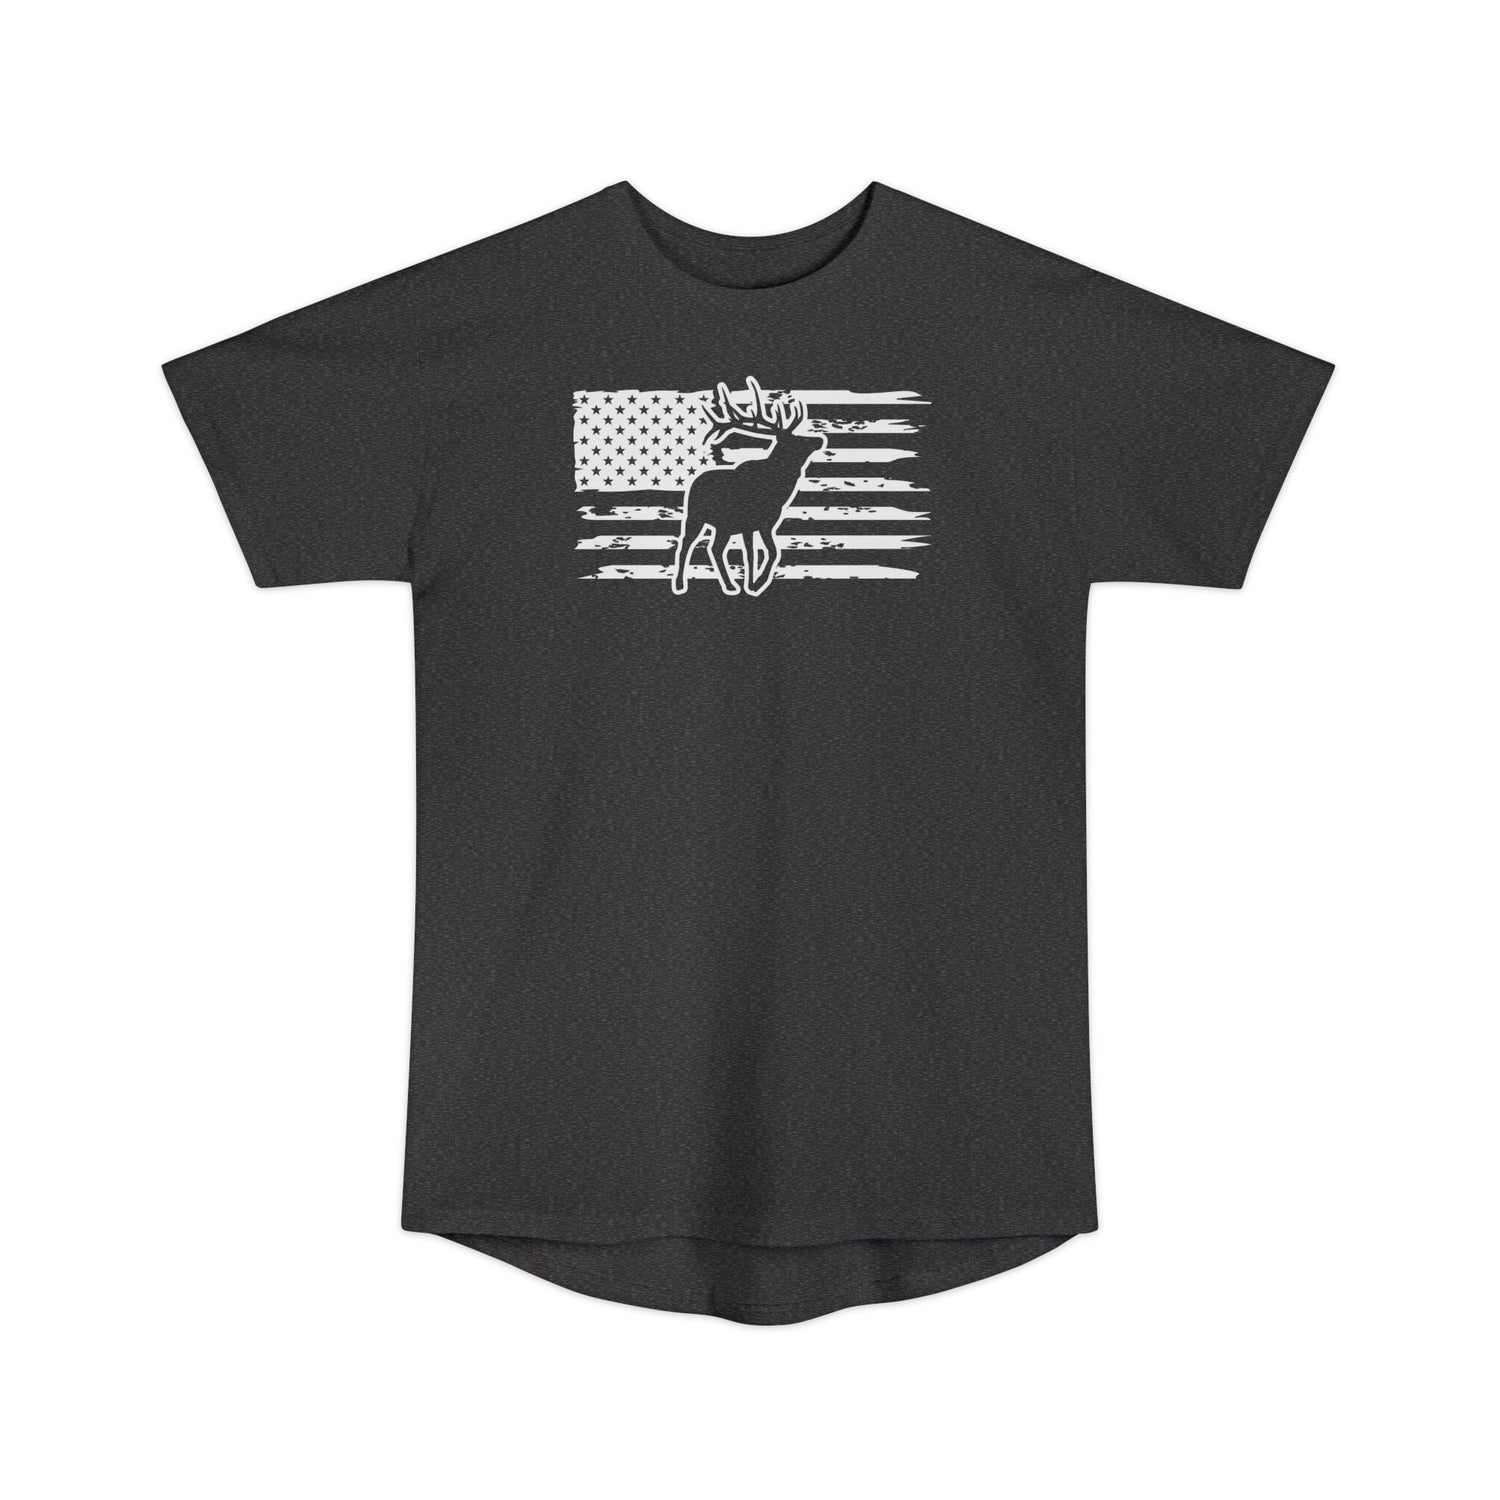 Athletic tall patriotic elk hunting t-shirt, color dark grey, front design placement